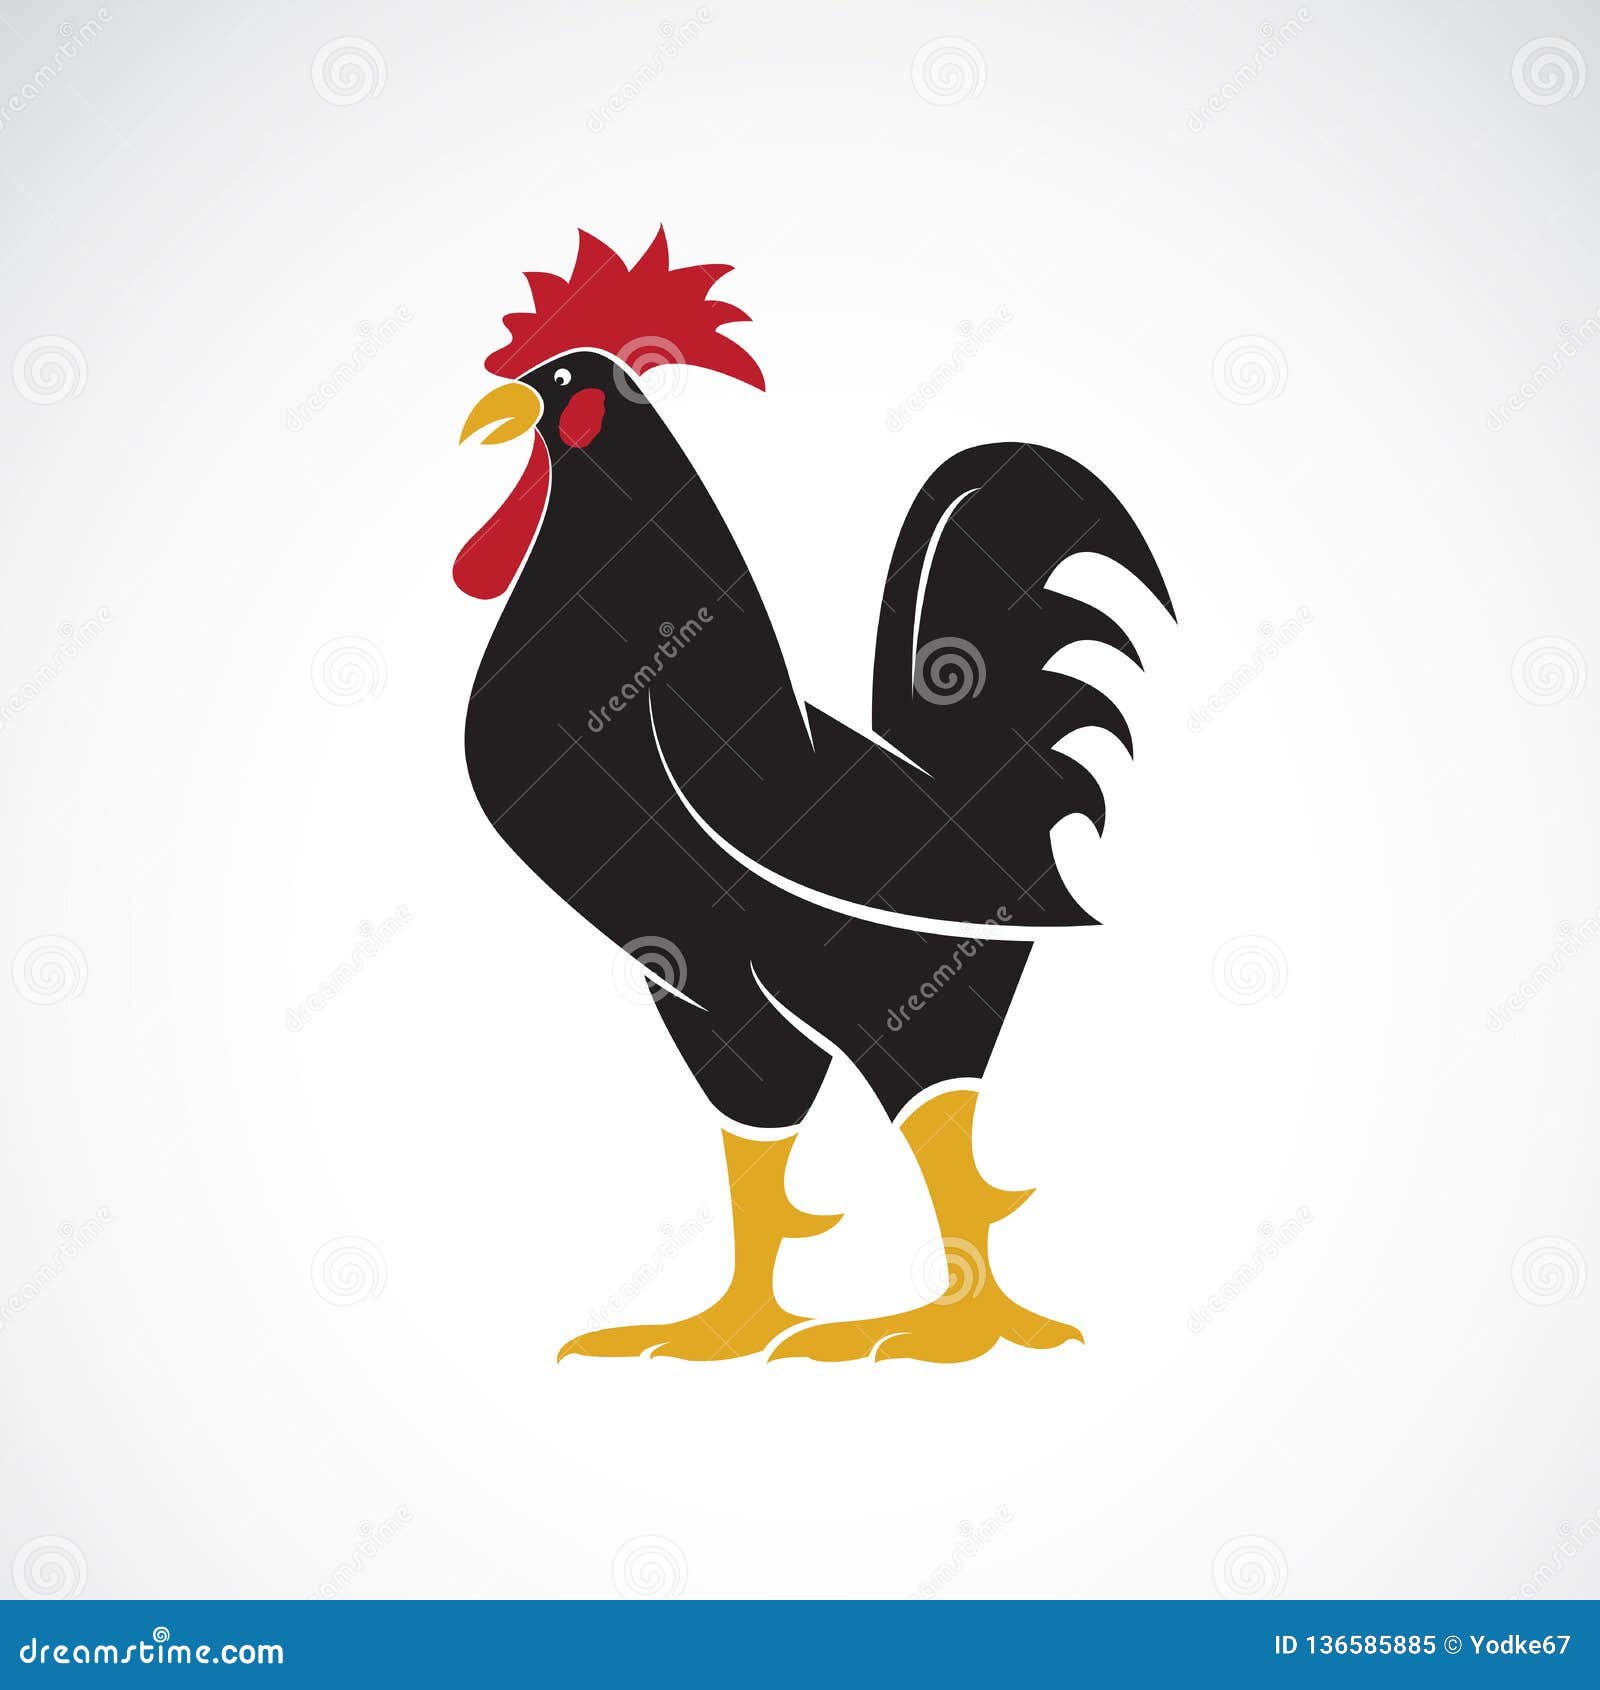 Download Vector Of Rooster Or Design On White Background., Animal ...